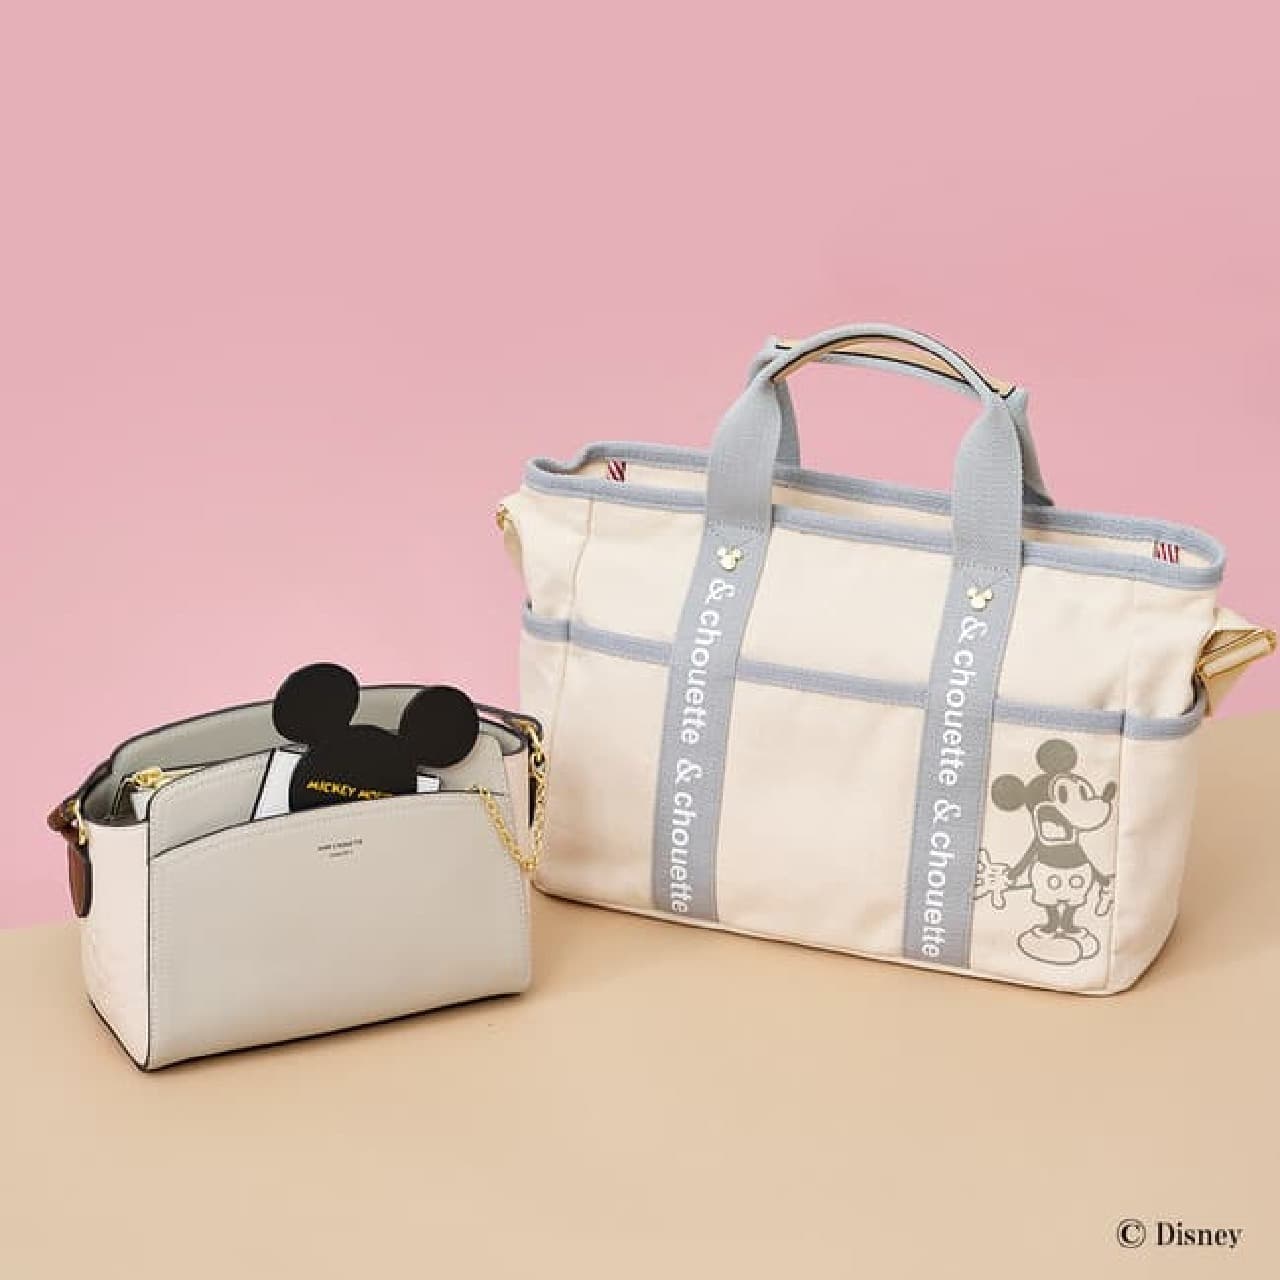 & Satchel "Mickey Collection" Adult cute Mickey's soft backpack, shoulder bag, etc.